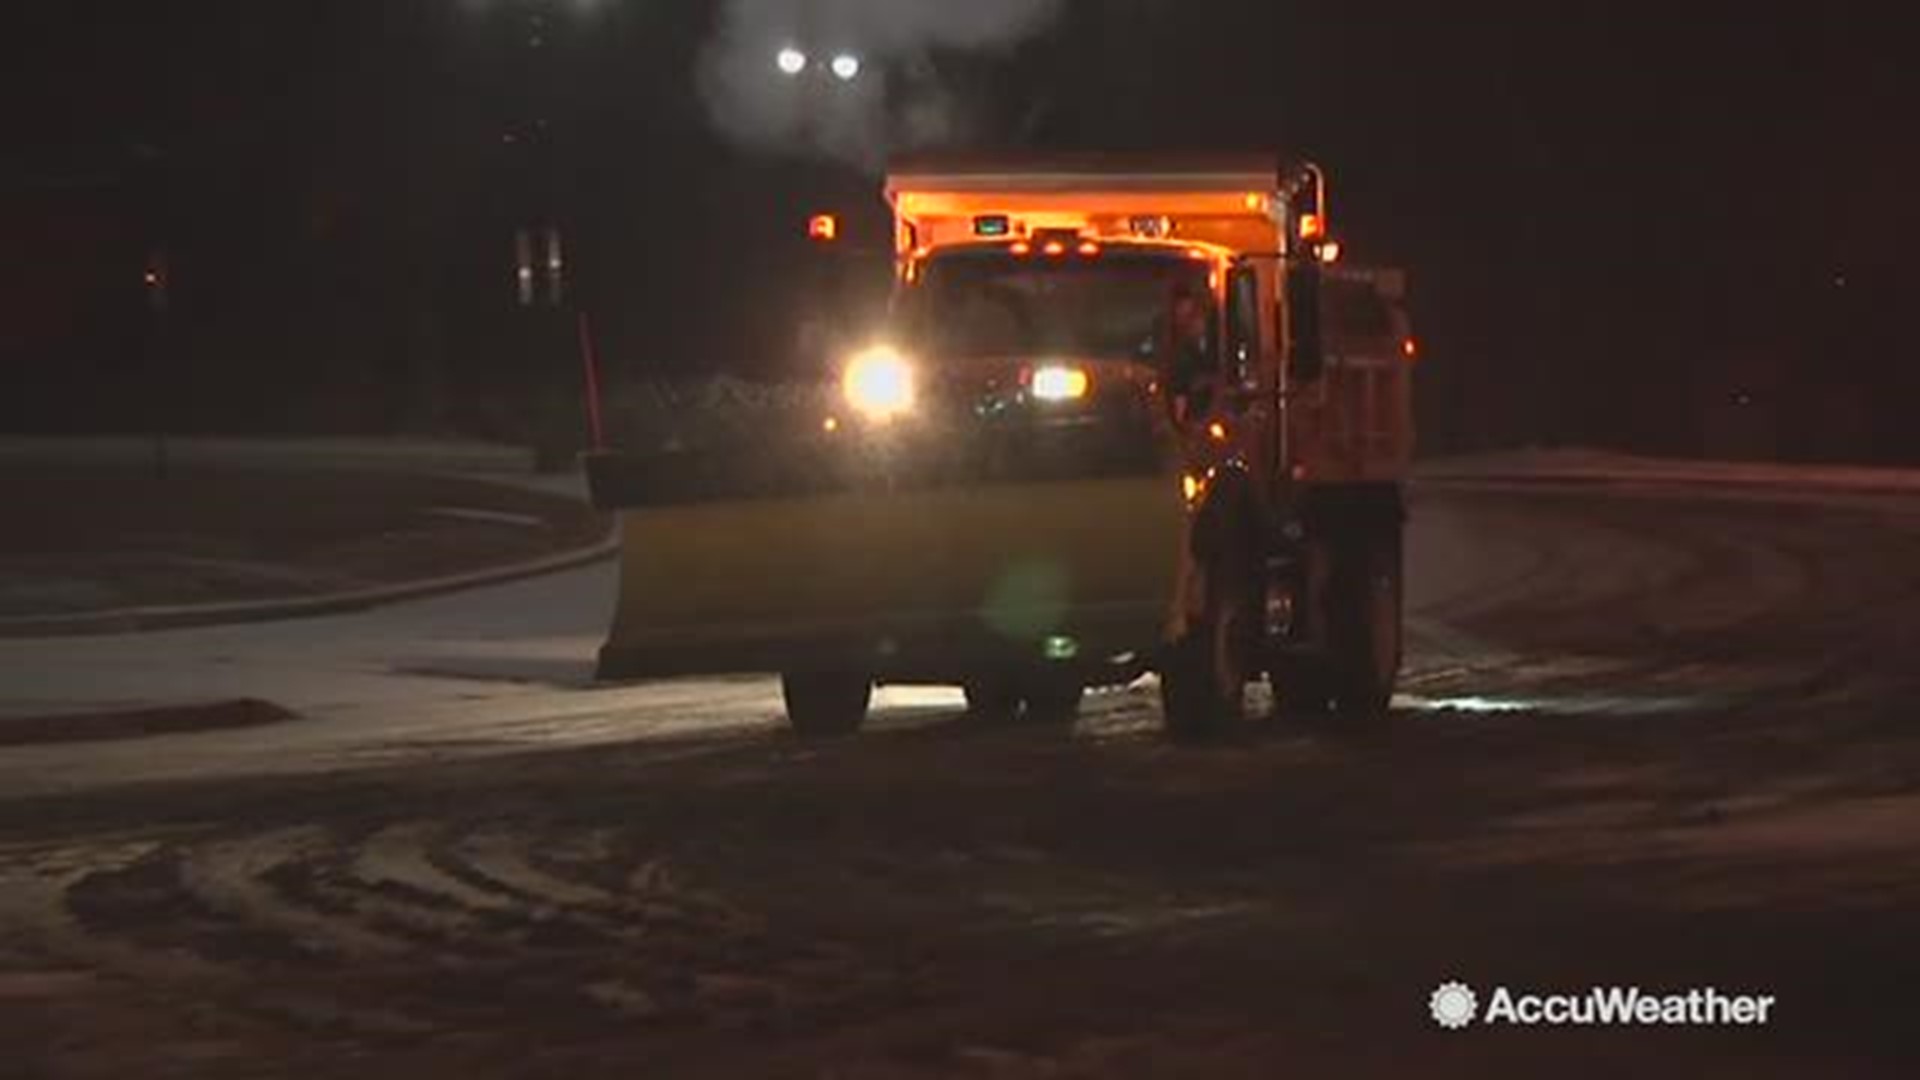 Snow fell hard on Albany, New York on Jan 19. The plow trucks in the area are working around the clock to make sure that the streets are safe to drive on.